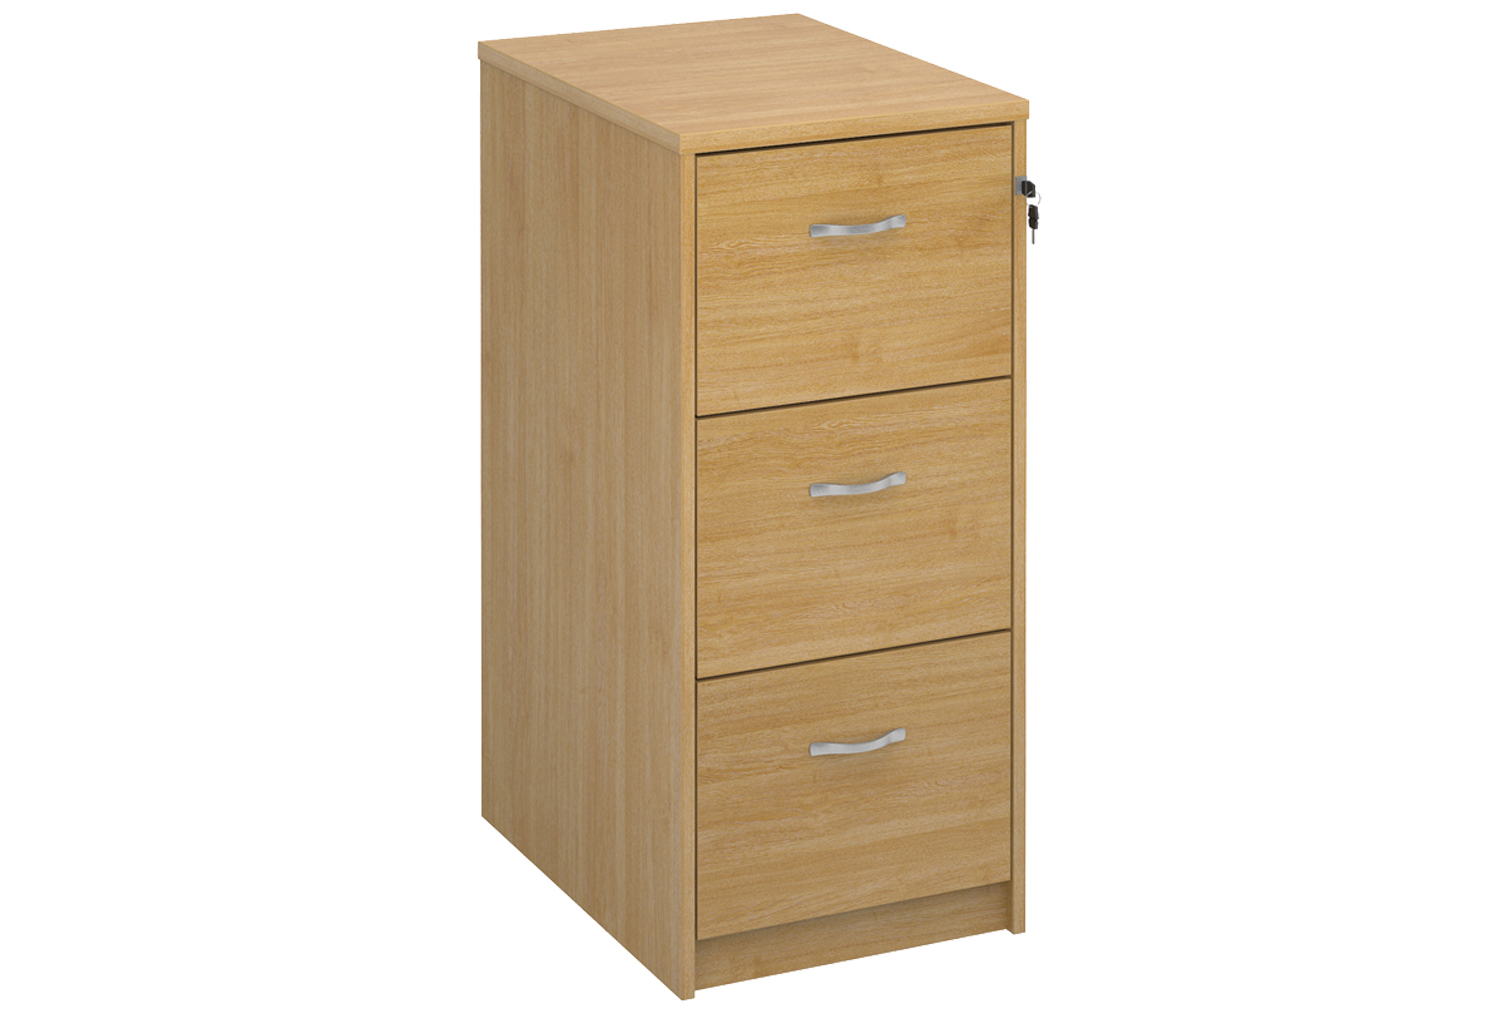 Tully Filing Cabinets, 3 Drawer - 48wx66dx105h (cm), Oak, Fully Installed